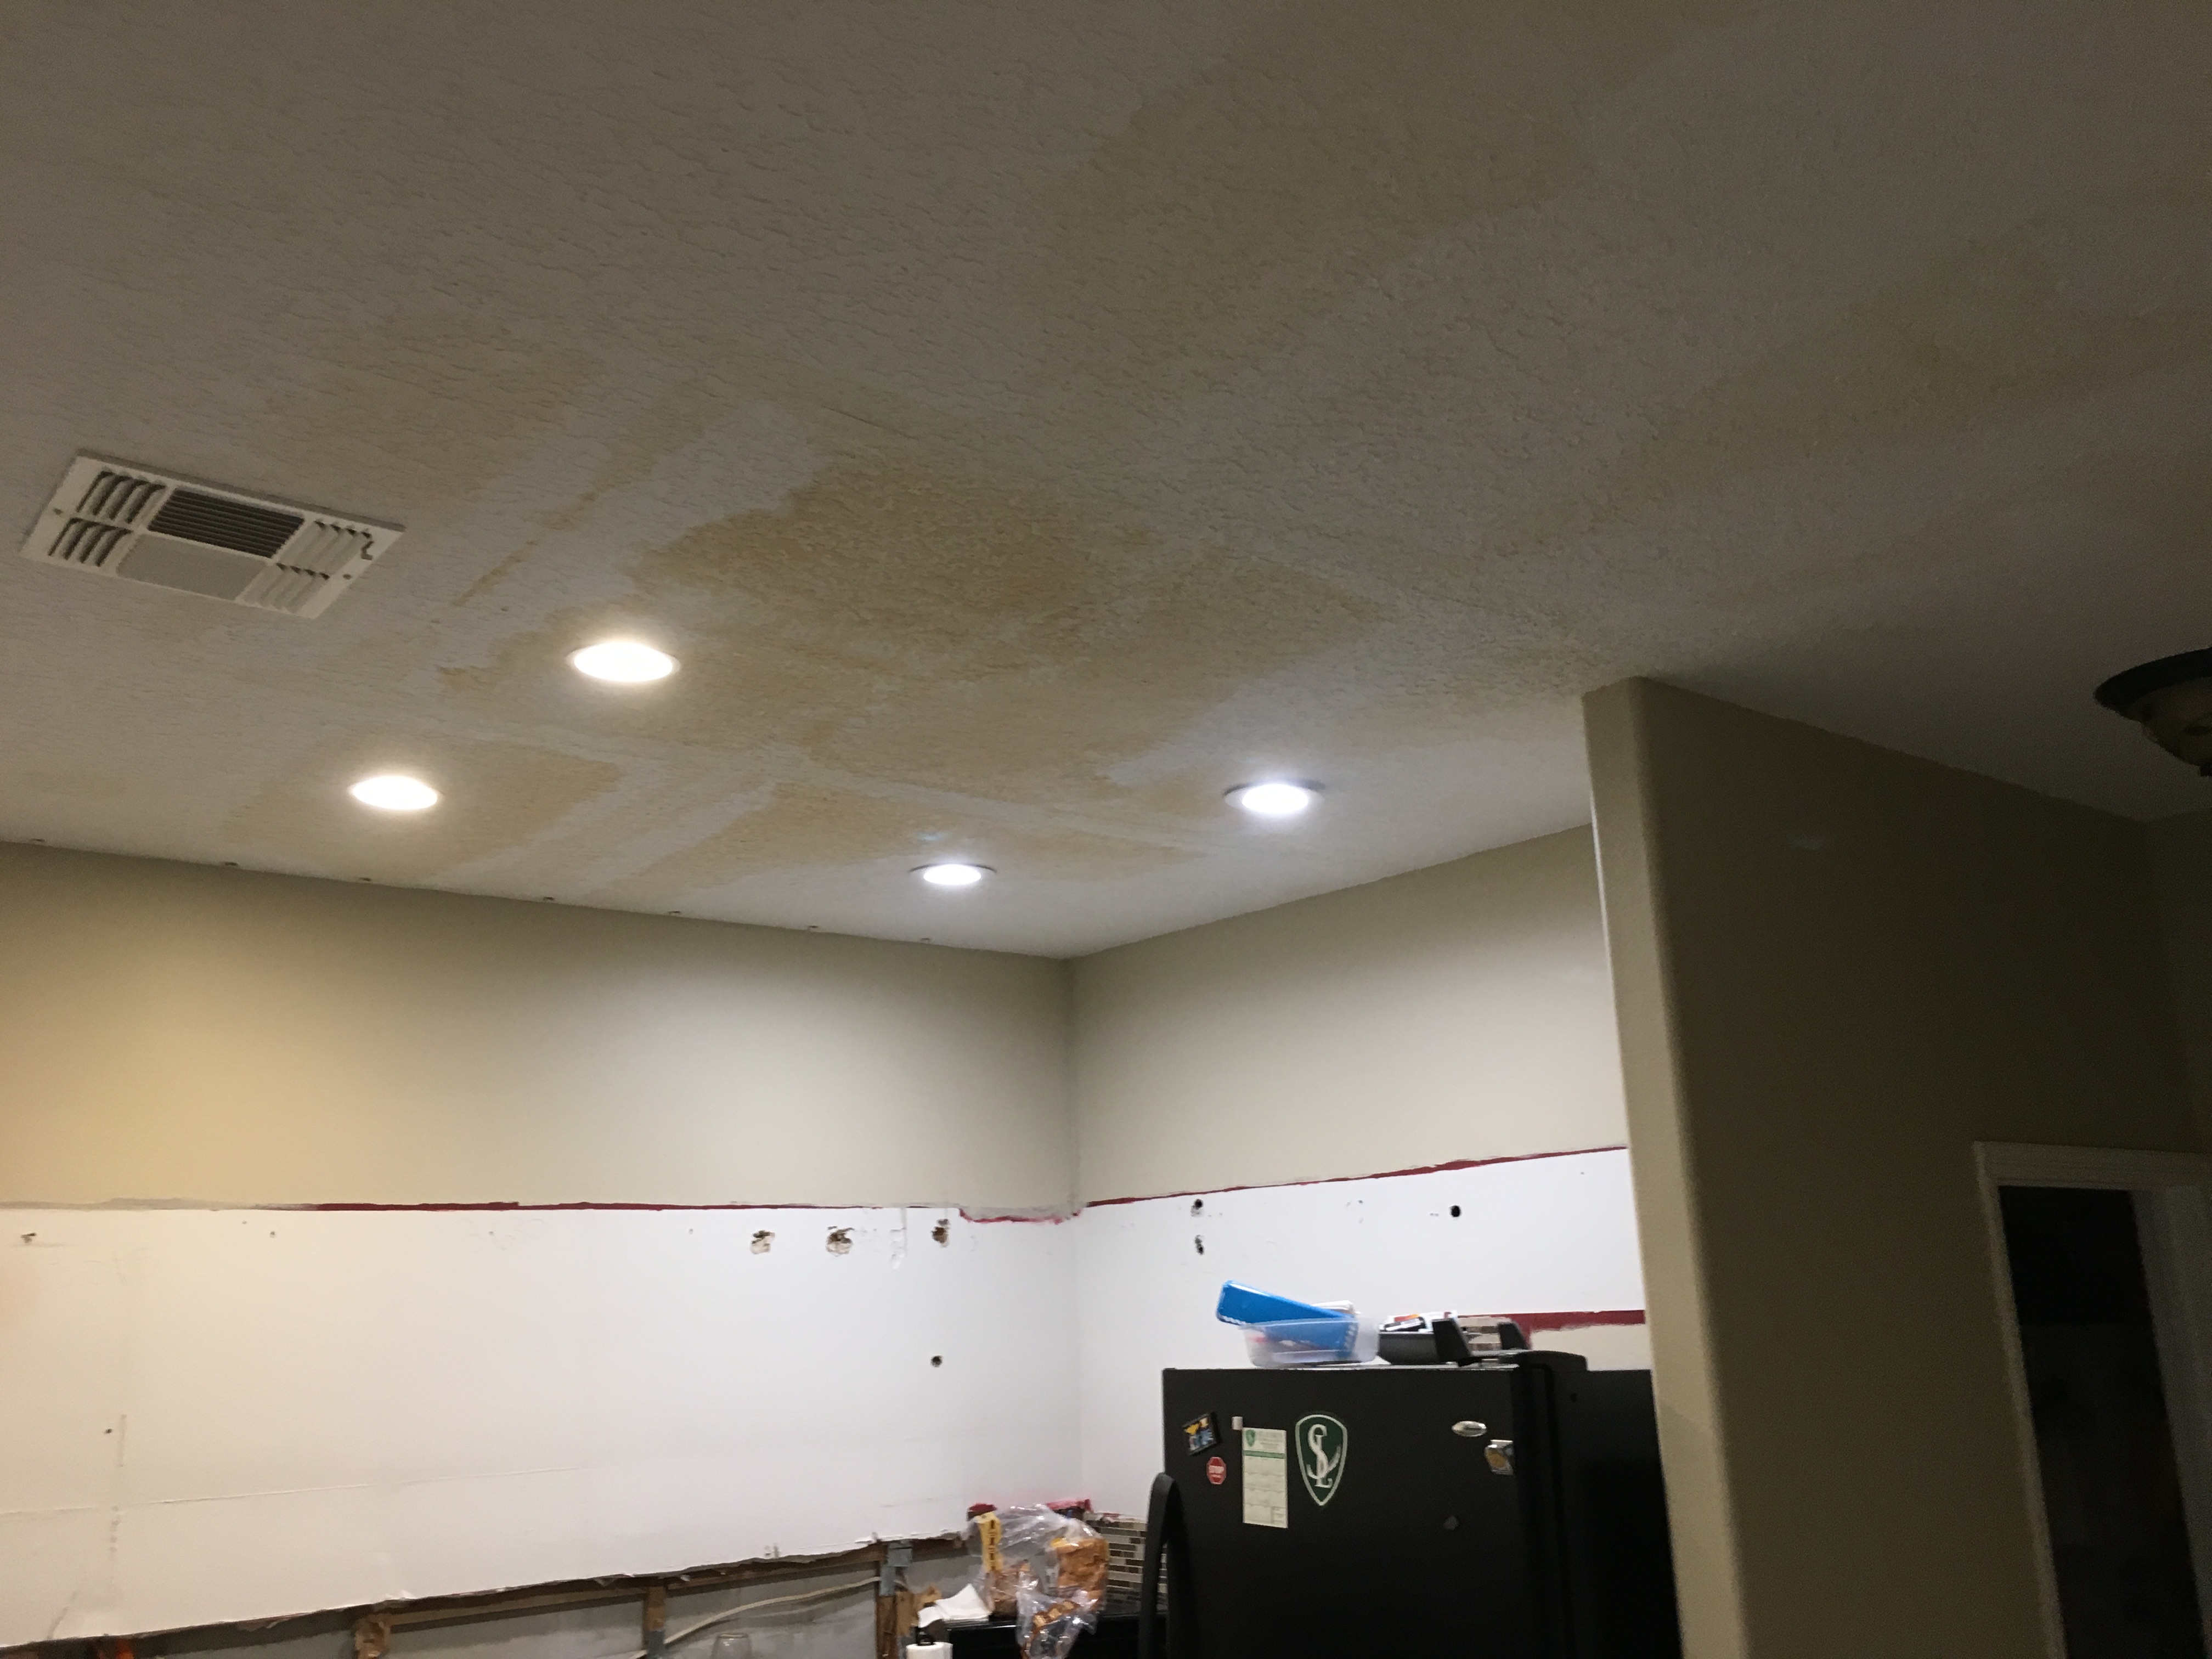 Water damage restoration and cleanup is no problem for our SERVPRO of Oviedo / Winter Springs East team! Give us a call today.